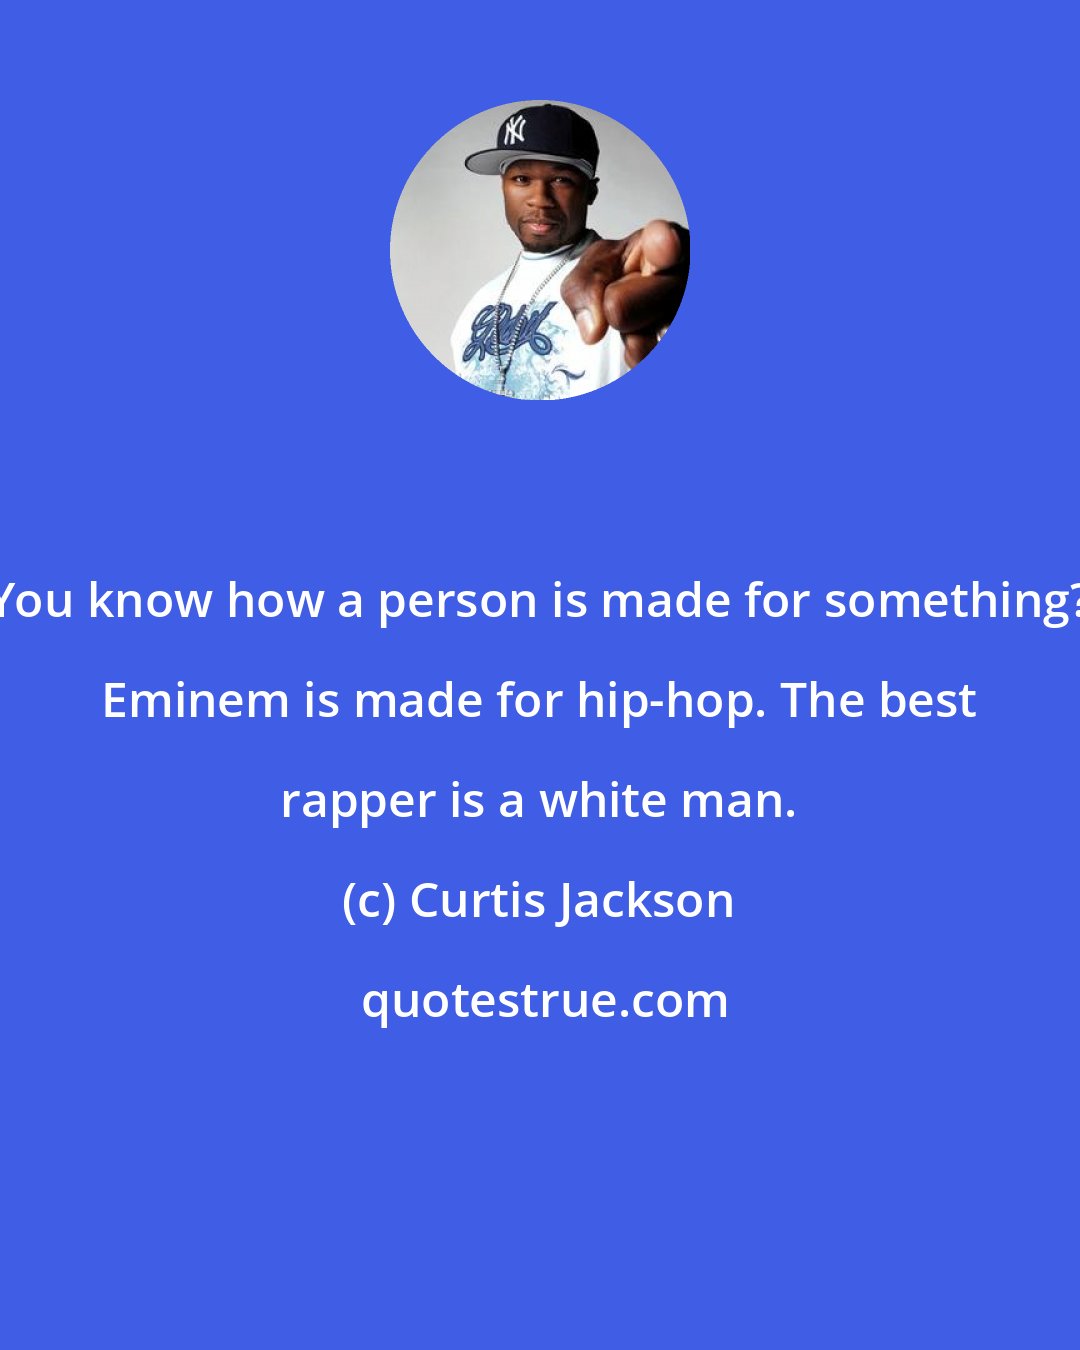 Curtis Jackson: You know how a person is made for something? Eminem is made for hip-hop. The best rapper is a white man.